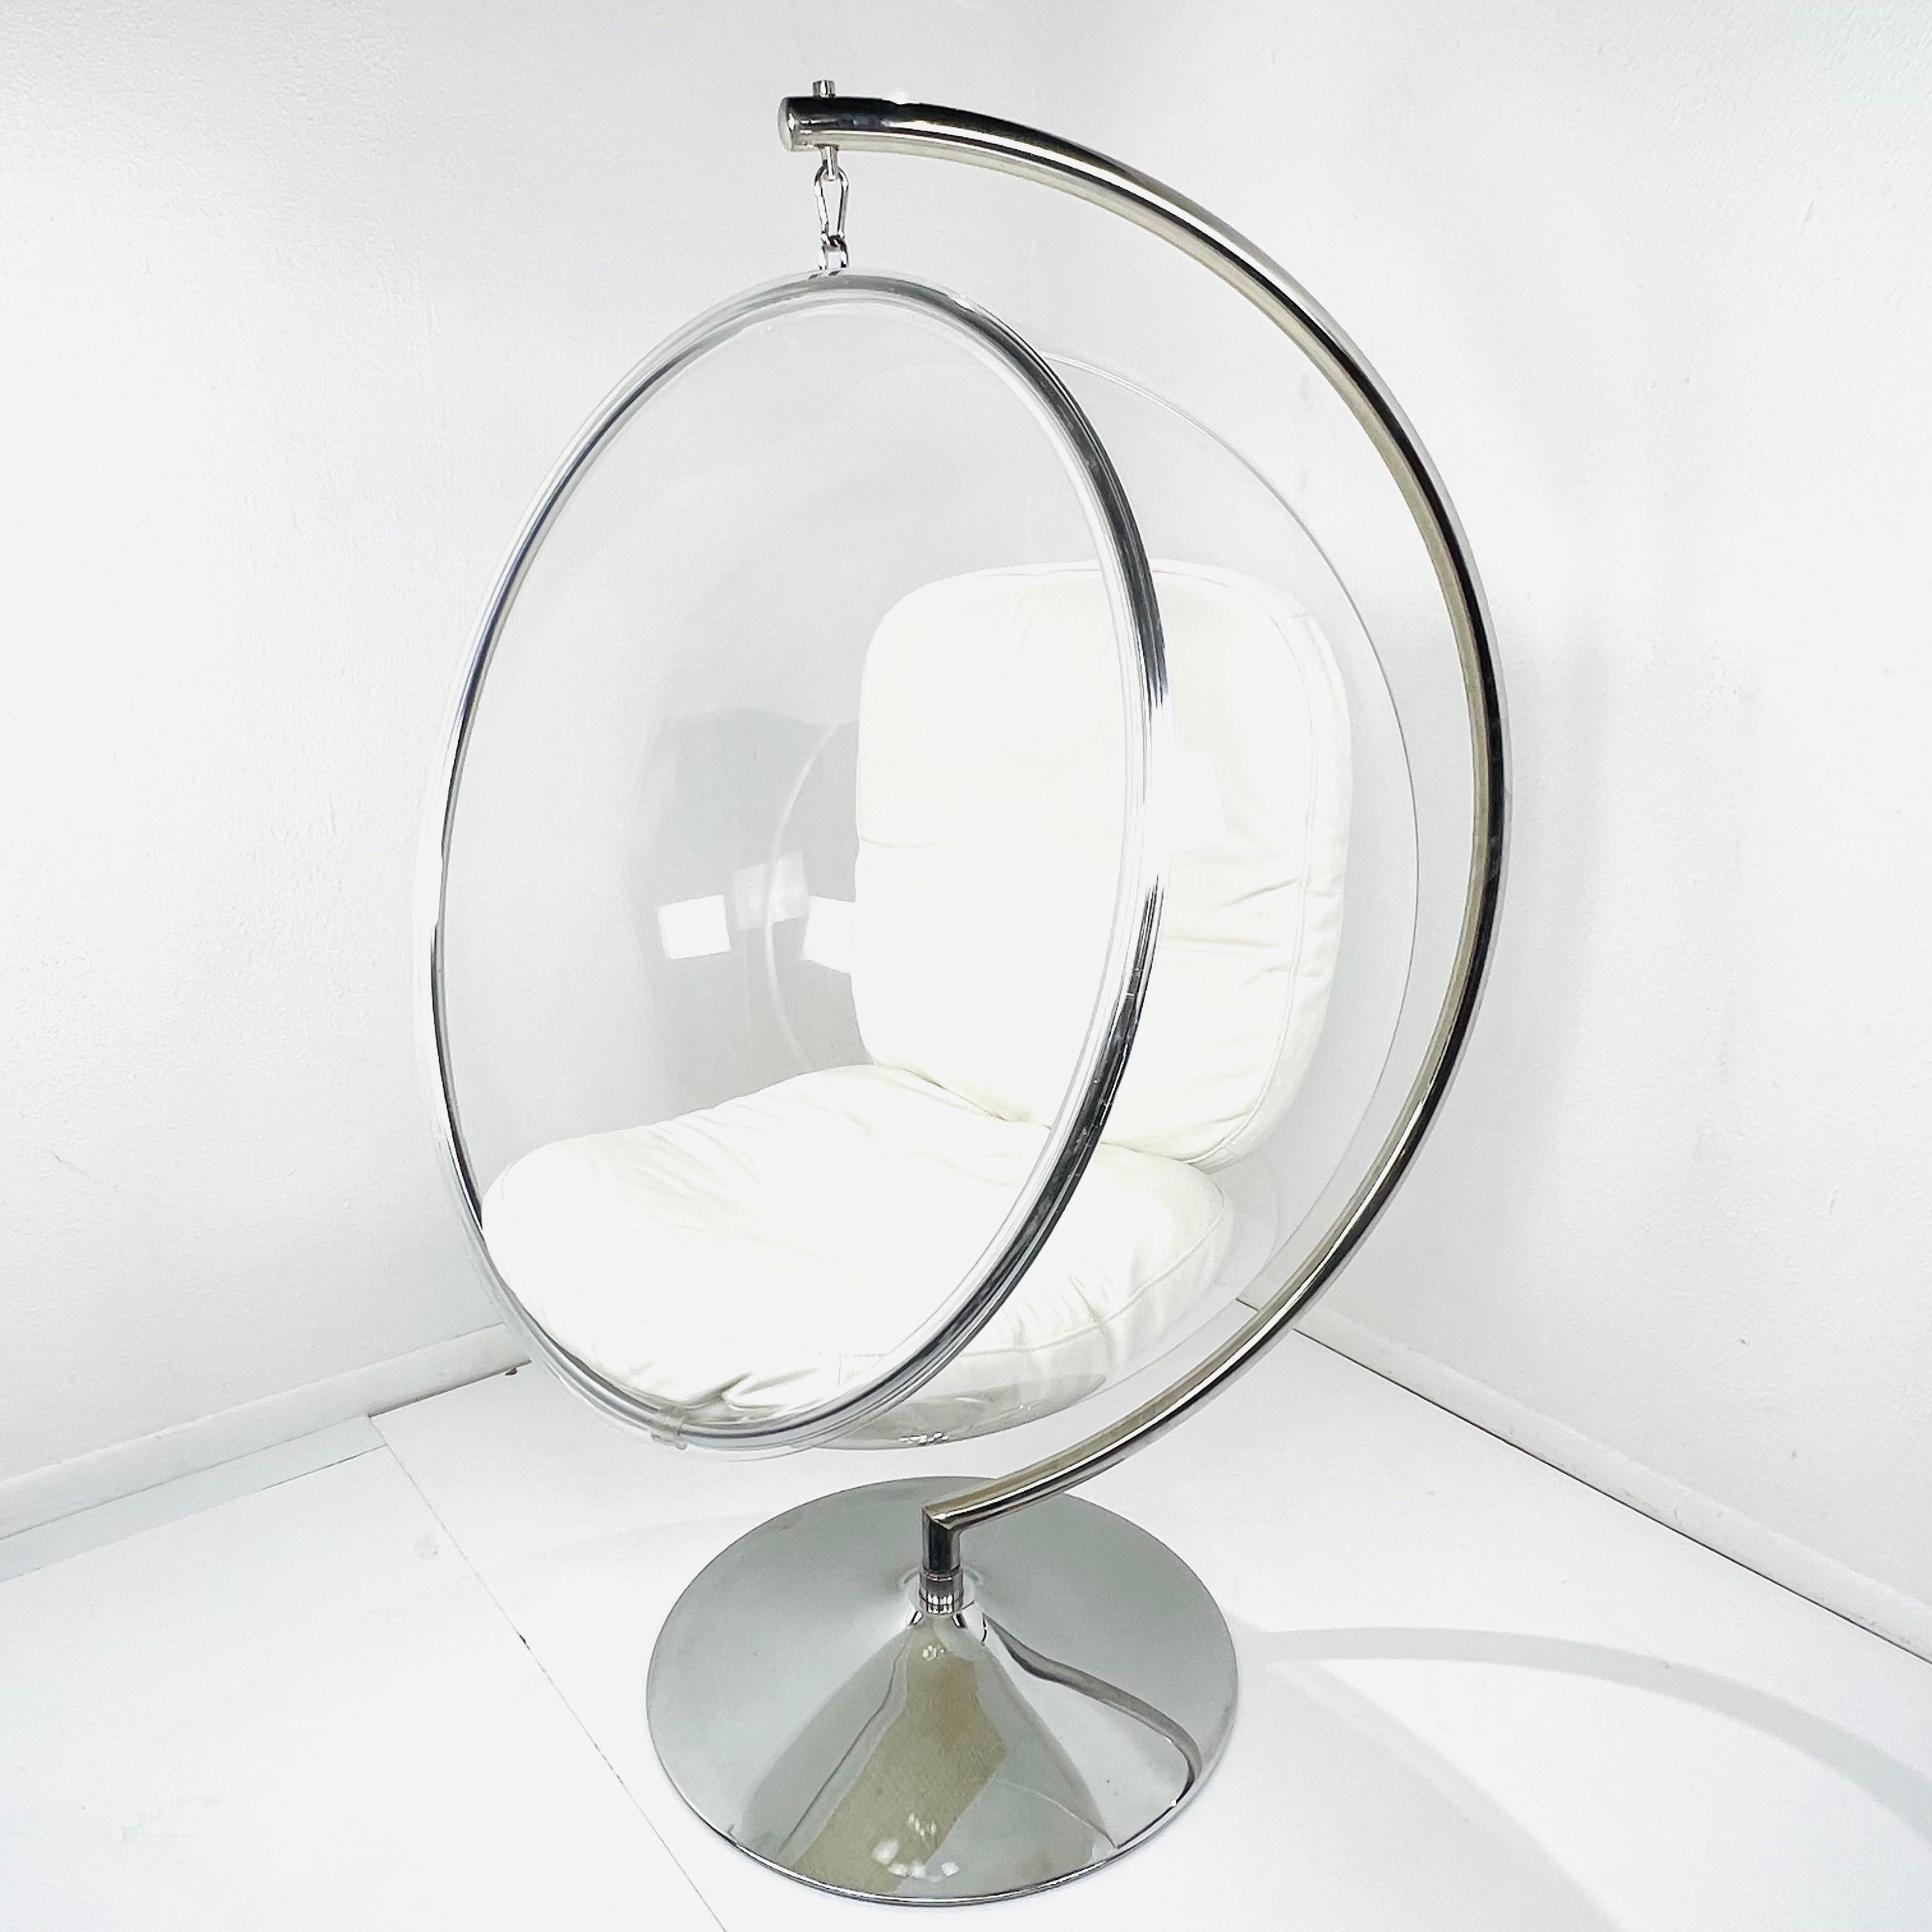 Mid-Century Modern Eero Aarnio Suspended Lucite Bubble Chair For Sale